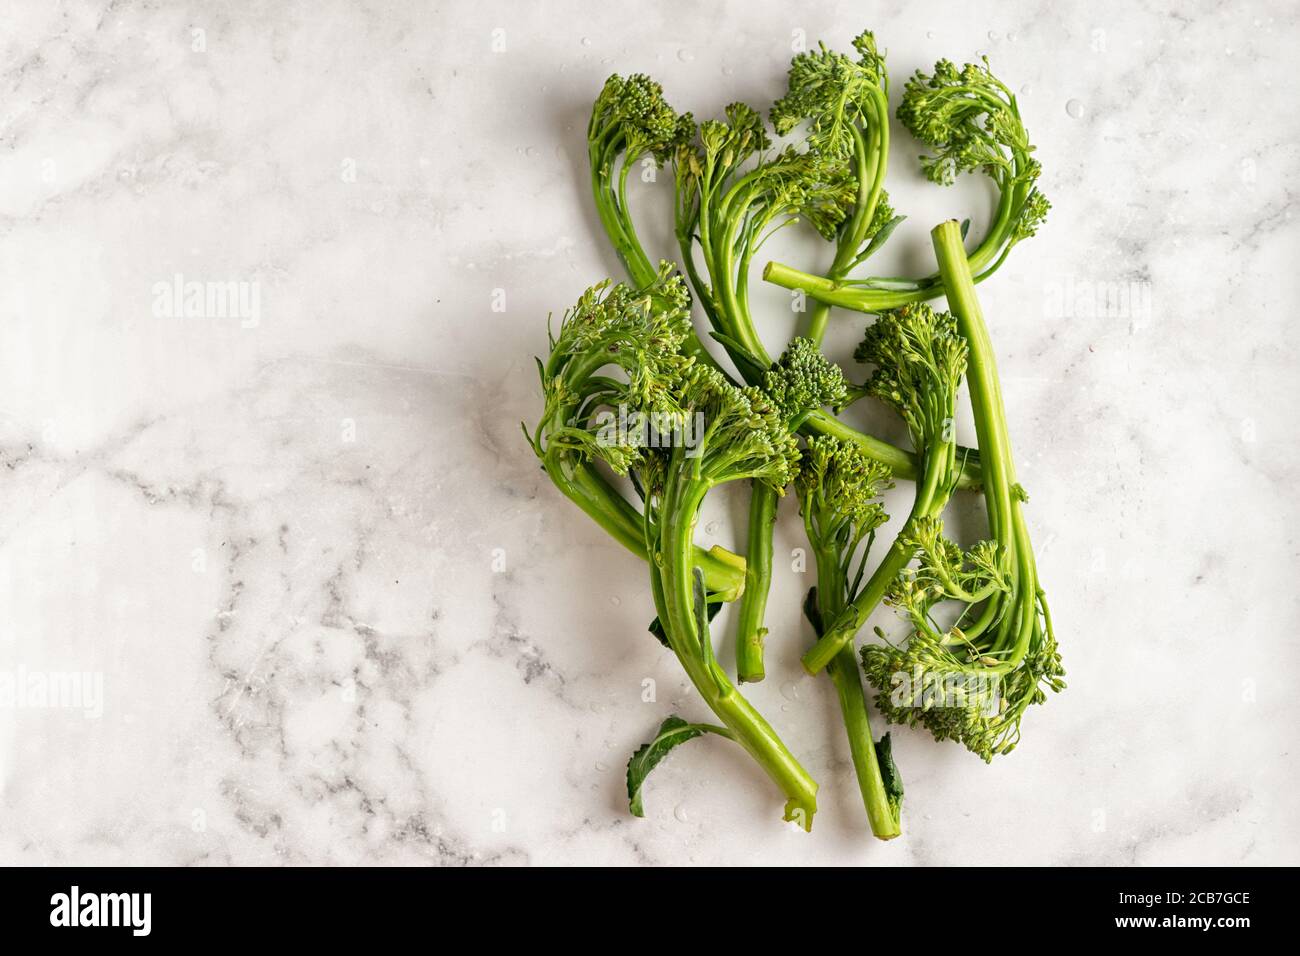 Top view of broccolini cabbage on white background Stock Photo